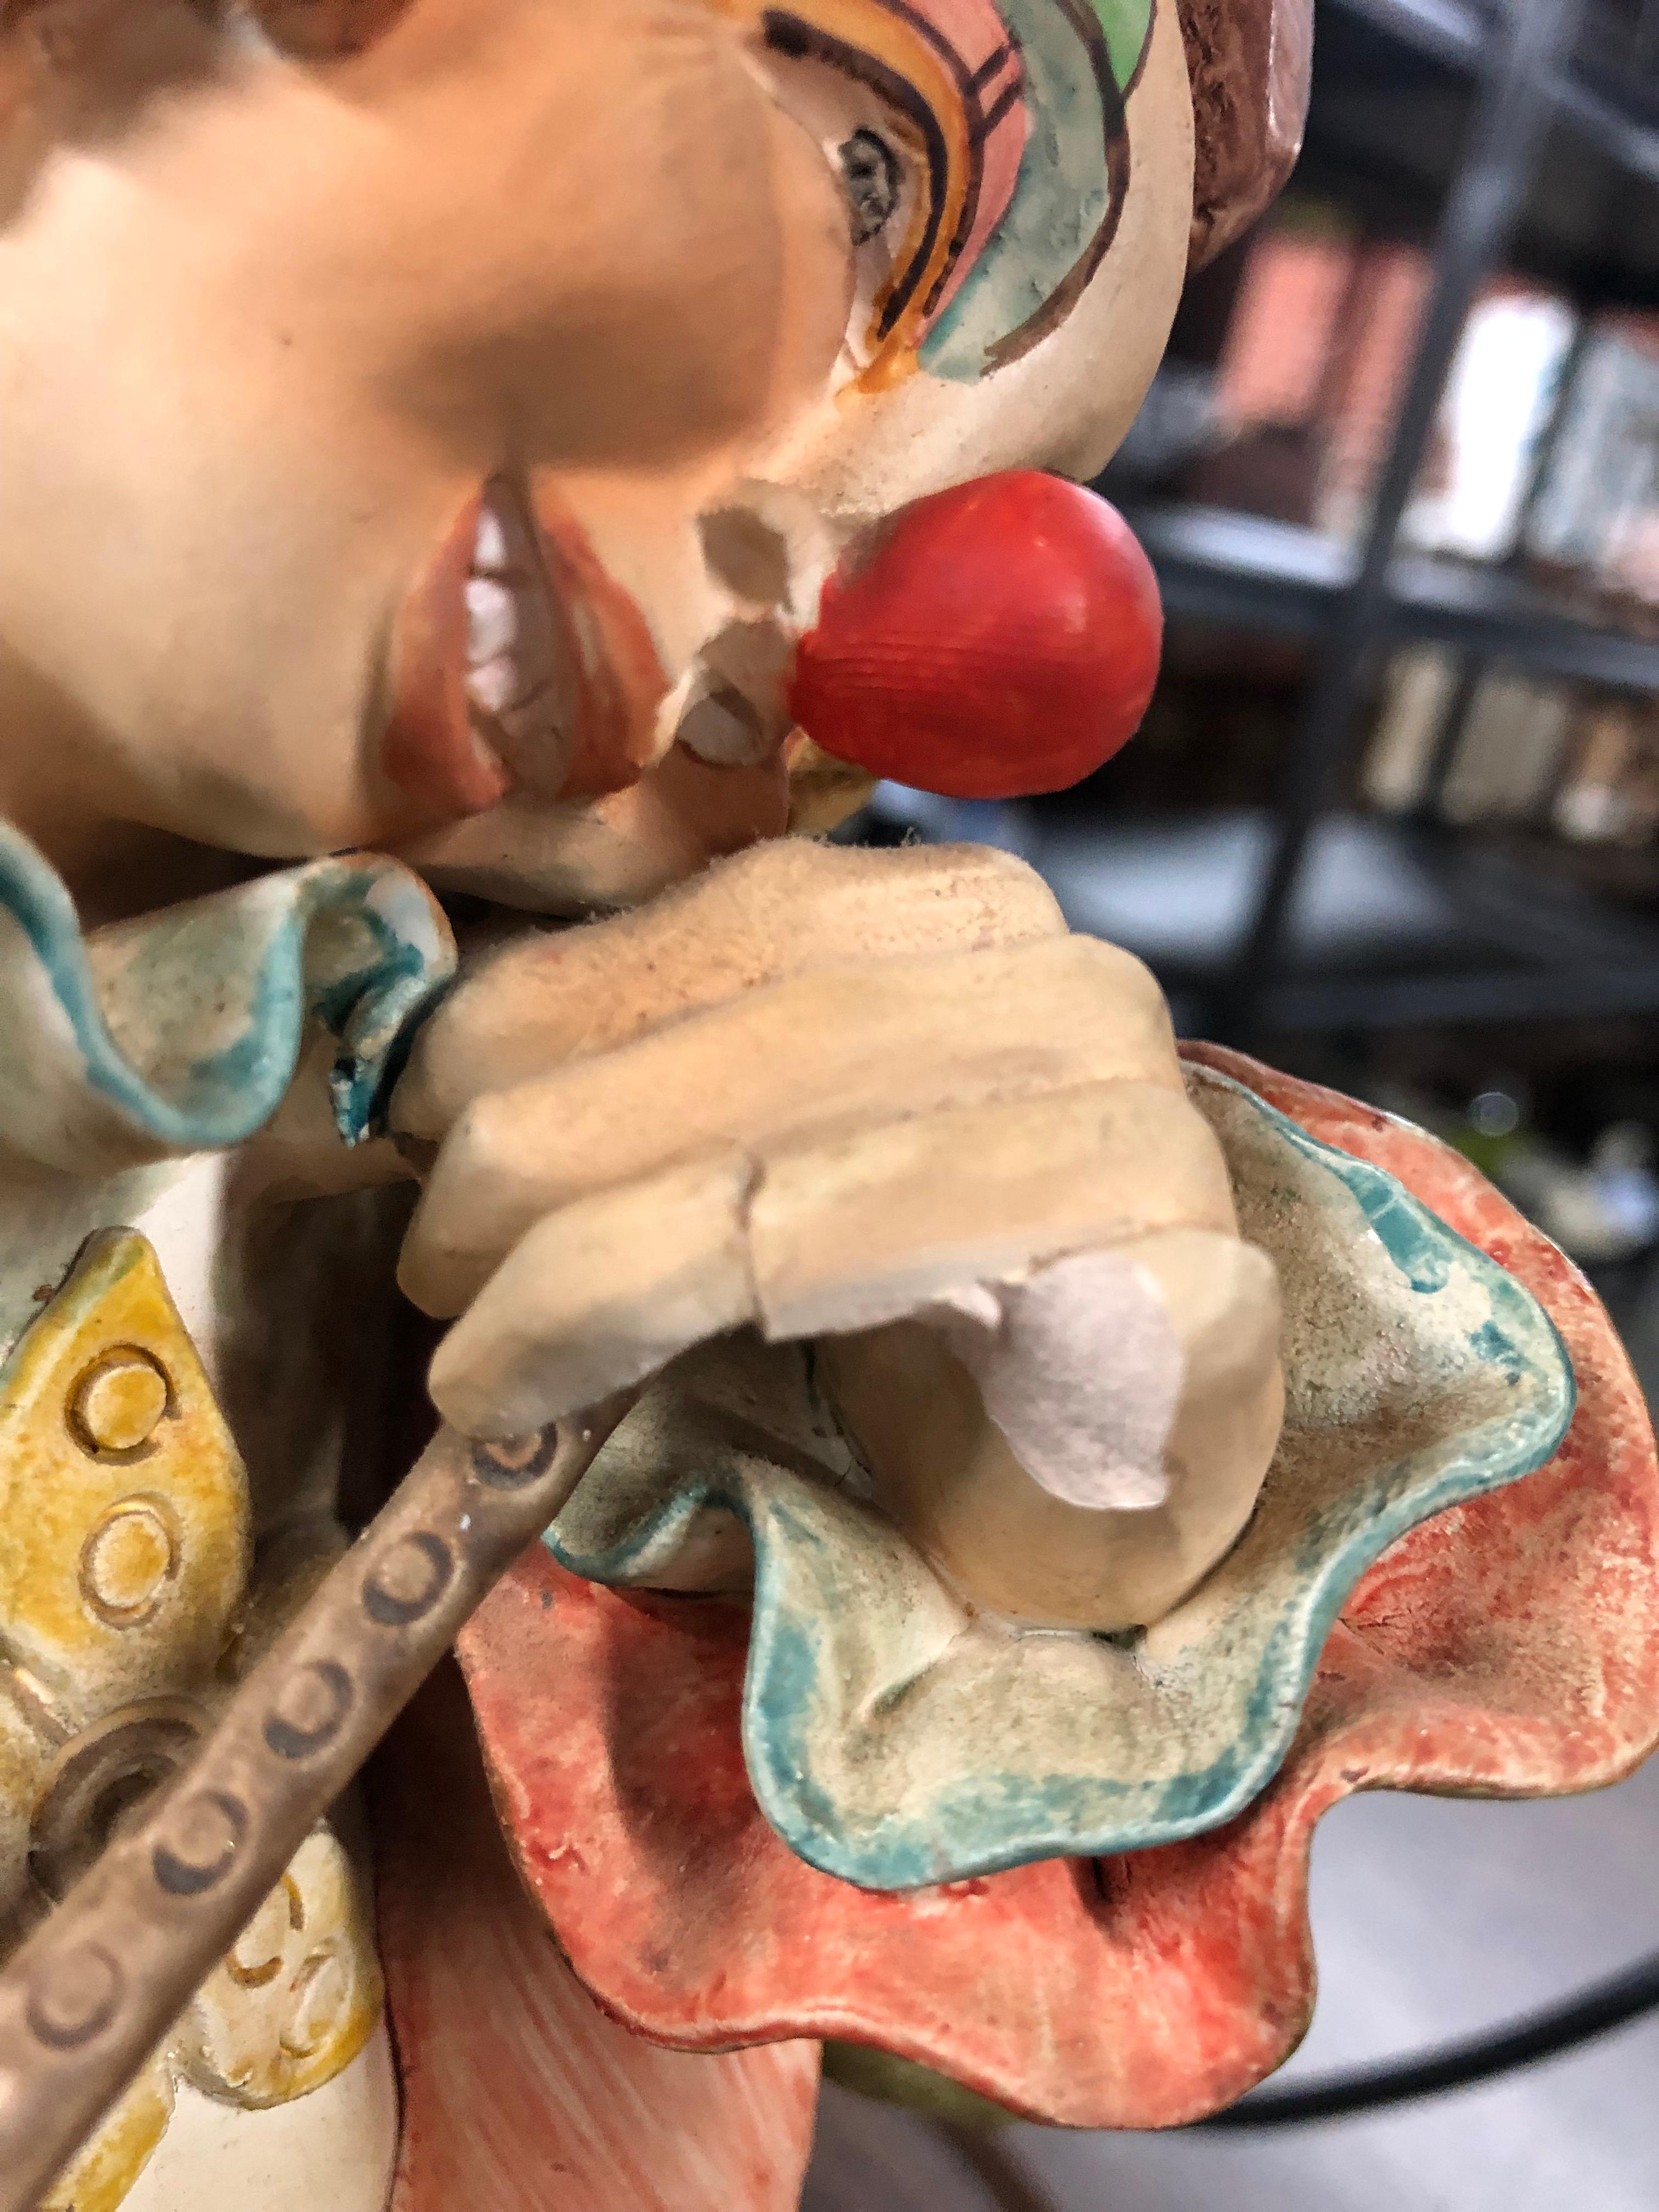 Two handpainted ceramic clown figurines, Made in Columbia, some damage, handpainted heavy clown